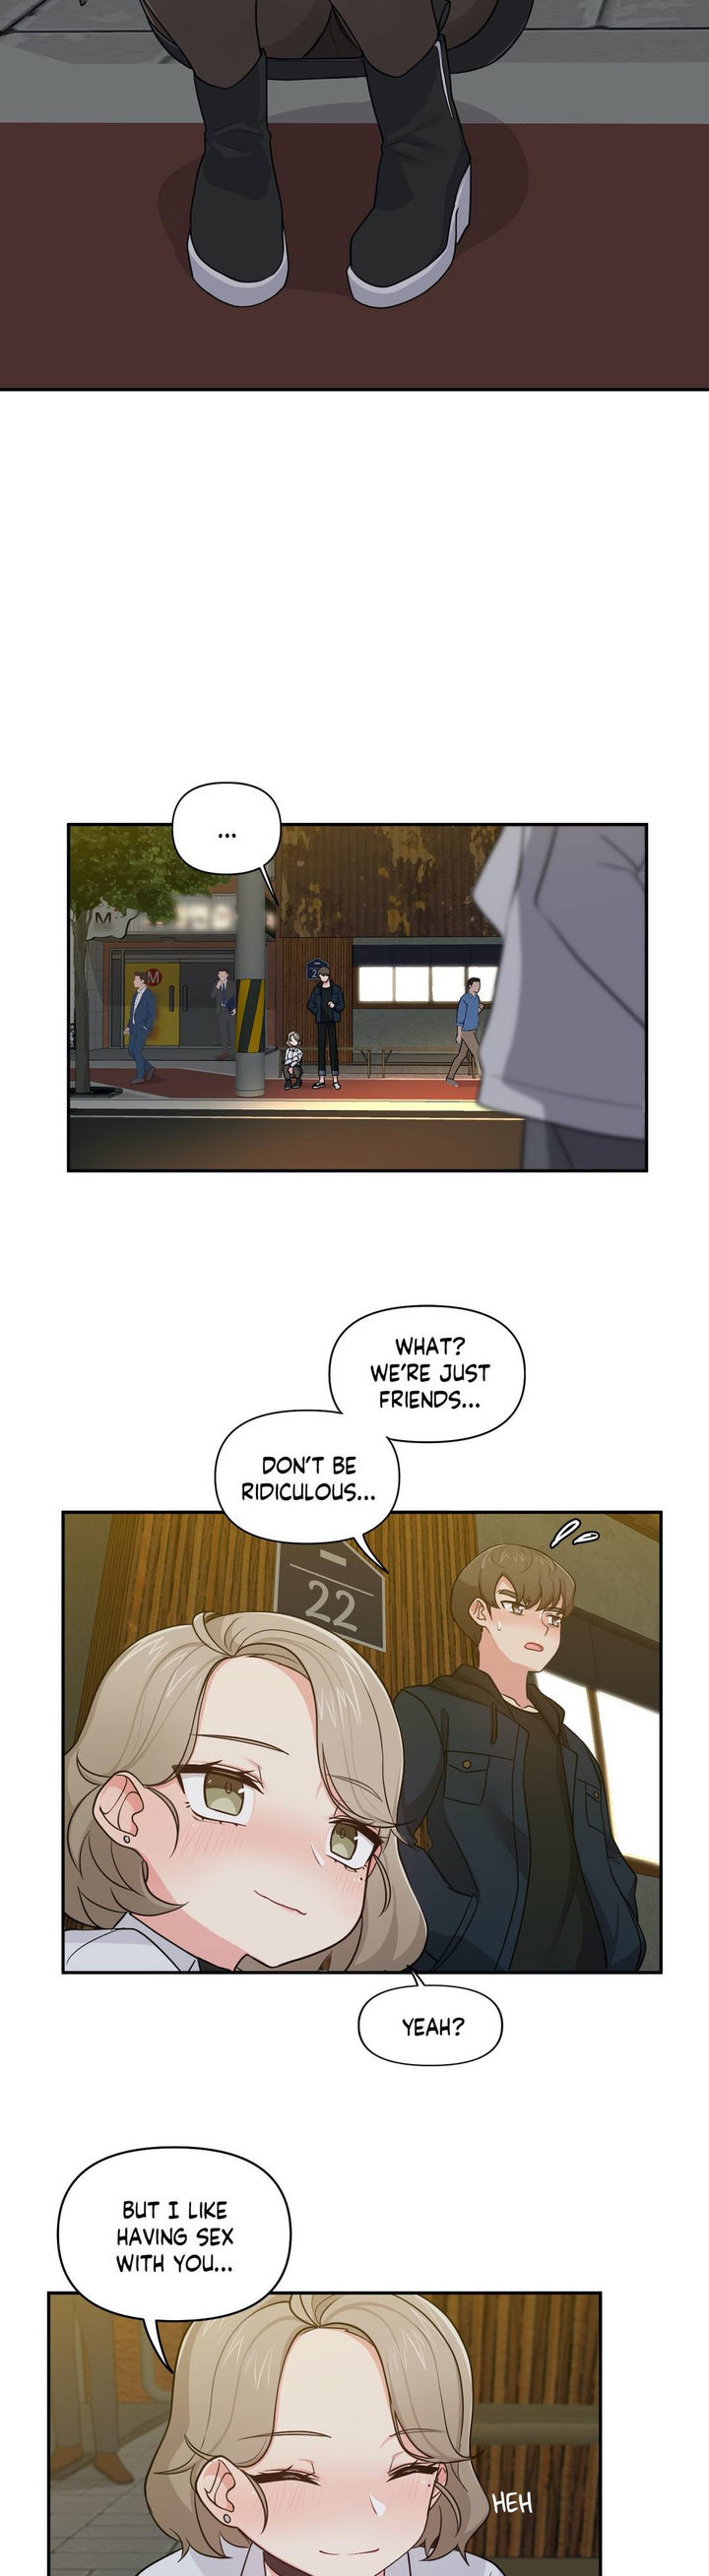 Friends or F-Buddies - Chapter 11 Page 2